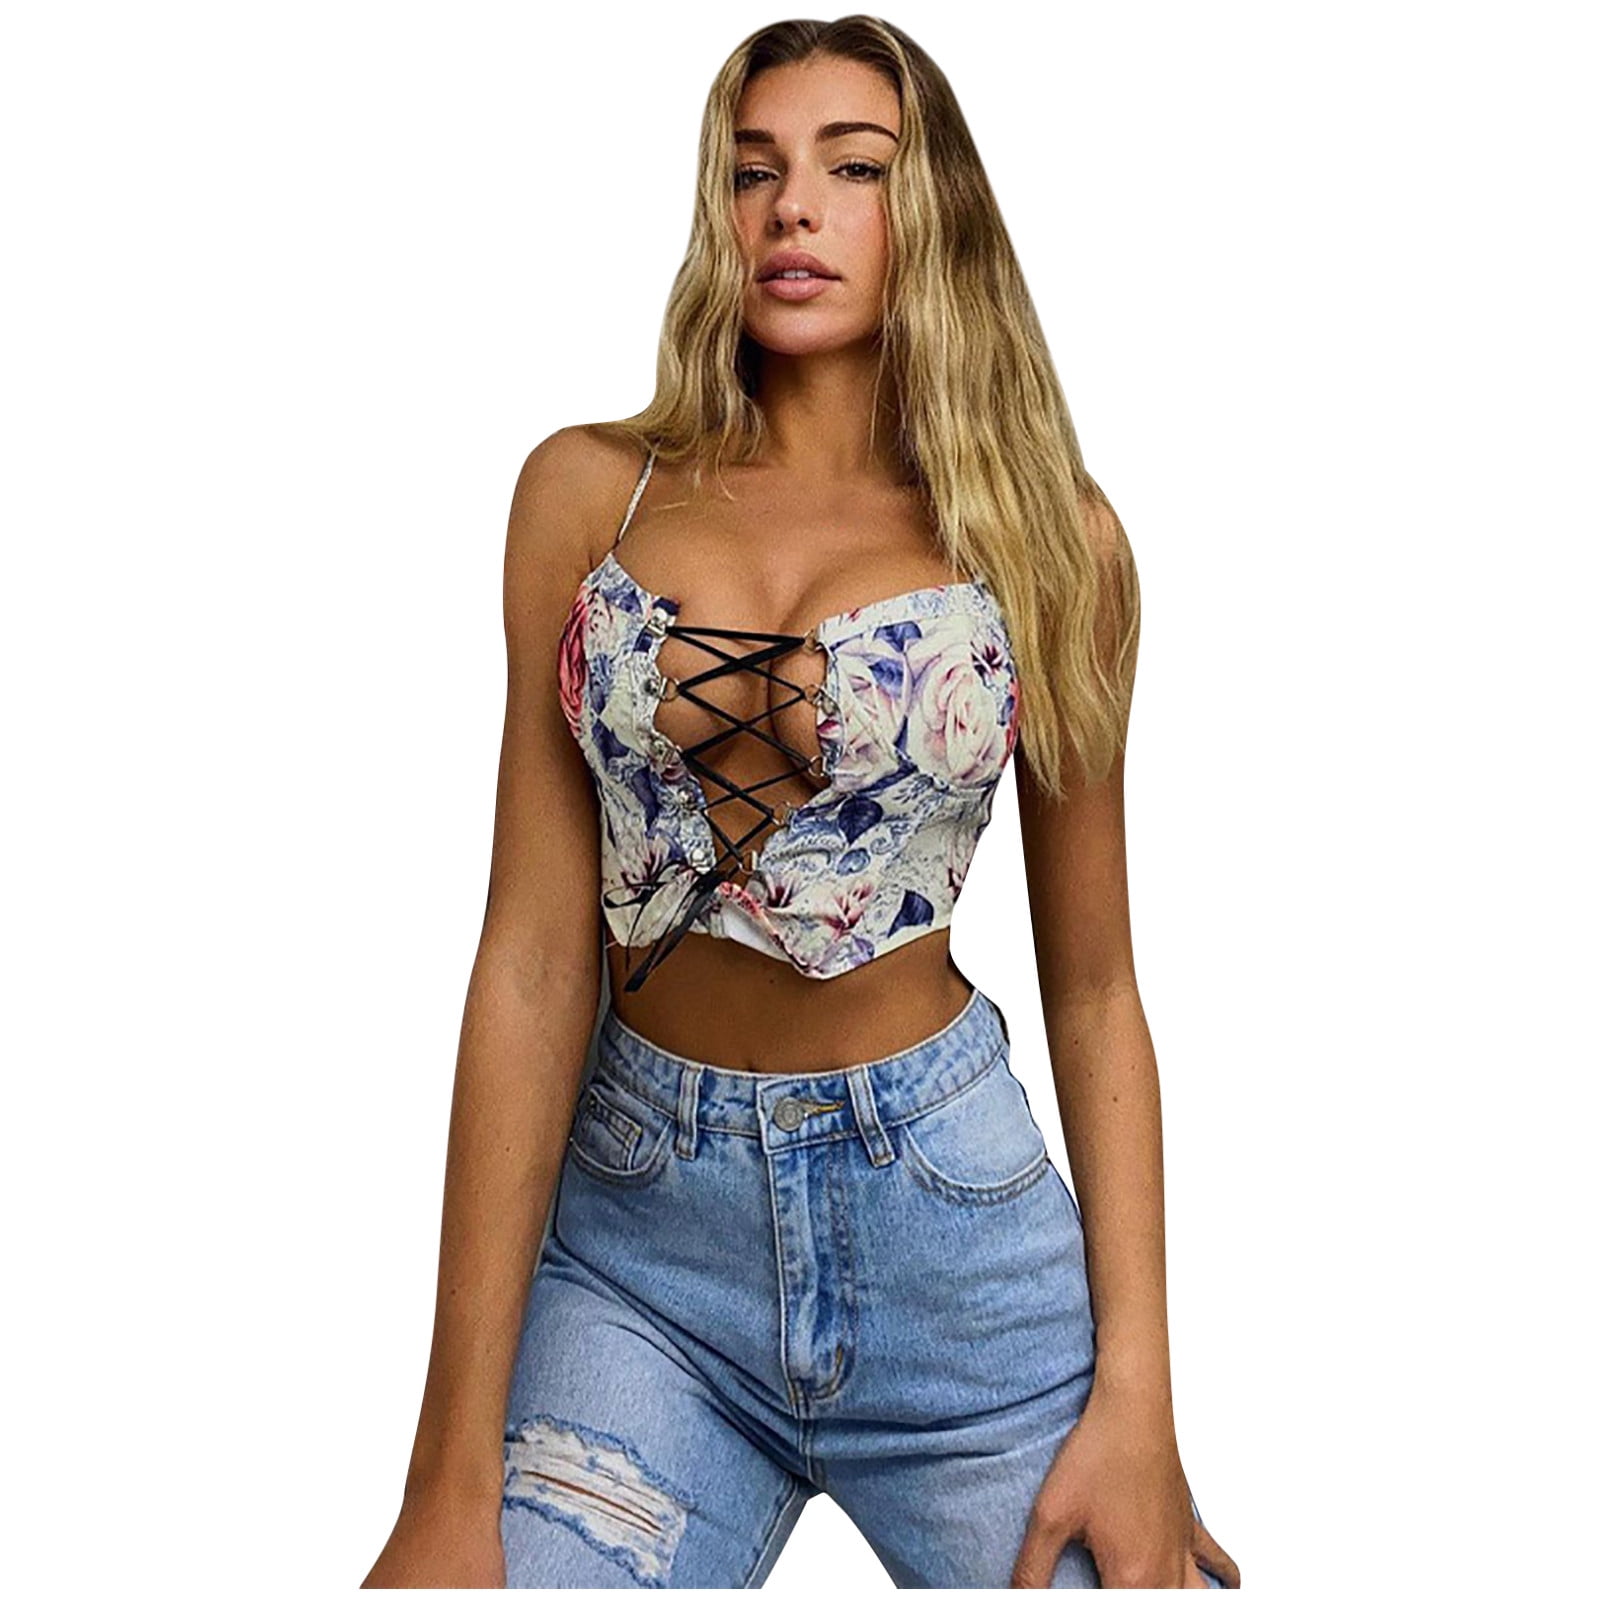 HSMQHJWE Tank Tops For Women Beach Saying Tops For Women T-Shirt Camisole  Polyester Sleeveless Back Cropped Daily Ladies Shell 